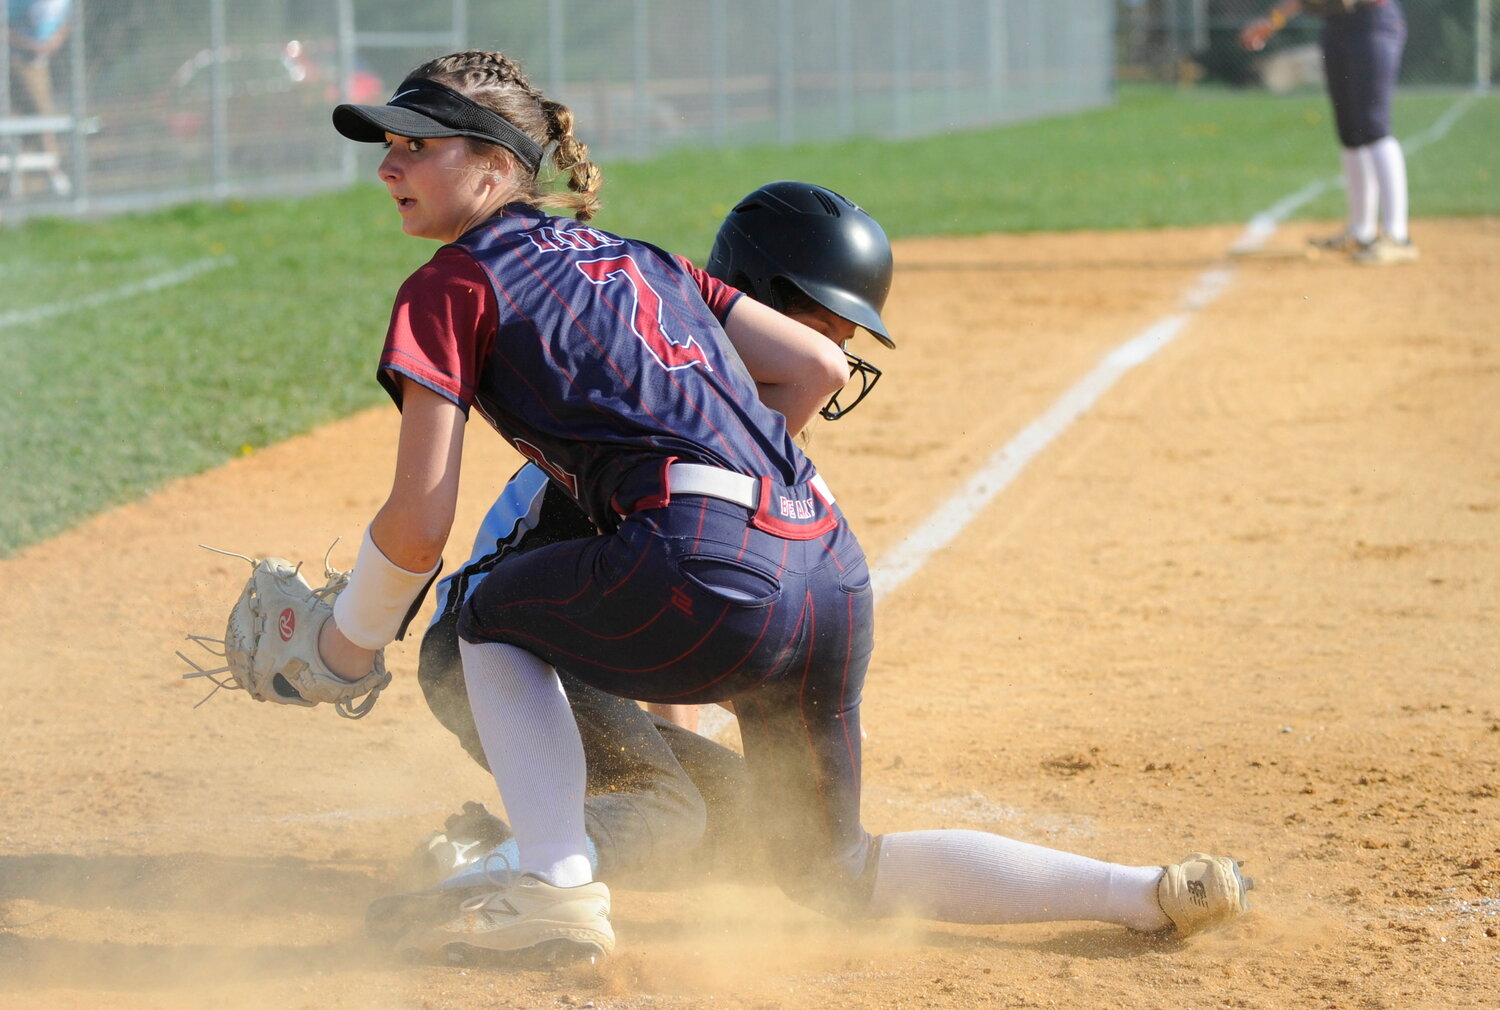 Tri-Valley’s winning hurler Jenna Carmody tags out Lady Bulldogs runner Gracyn Halloran in a close play at home as she backs up her catcher. Carmody tossed 7 innings, giving up 5 hits, and went 2-for-3, scored 2 runs, 3 RBIs and 2 steals.